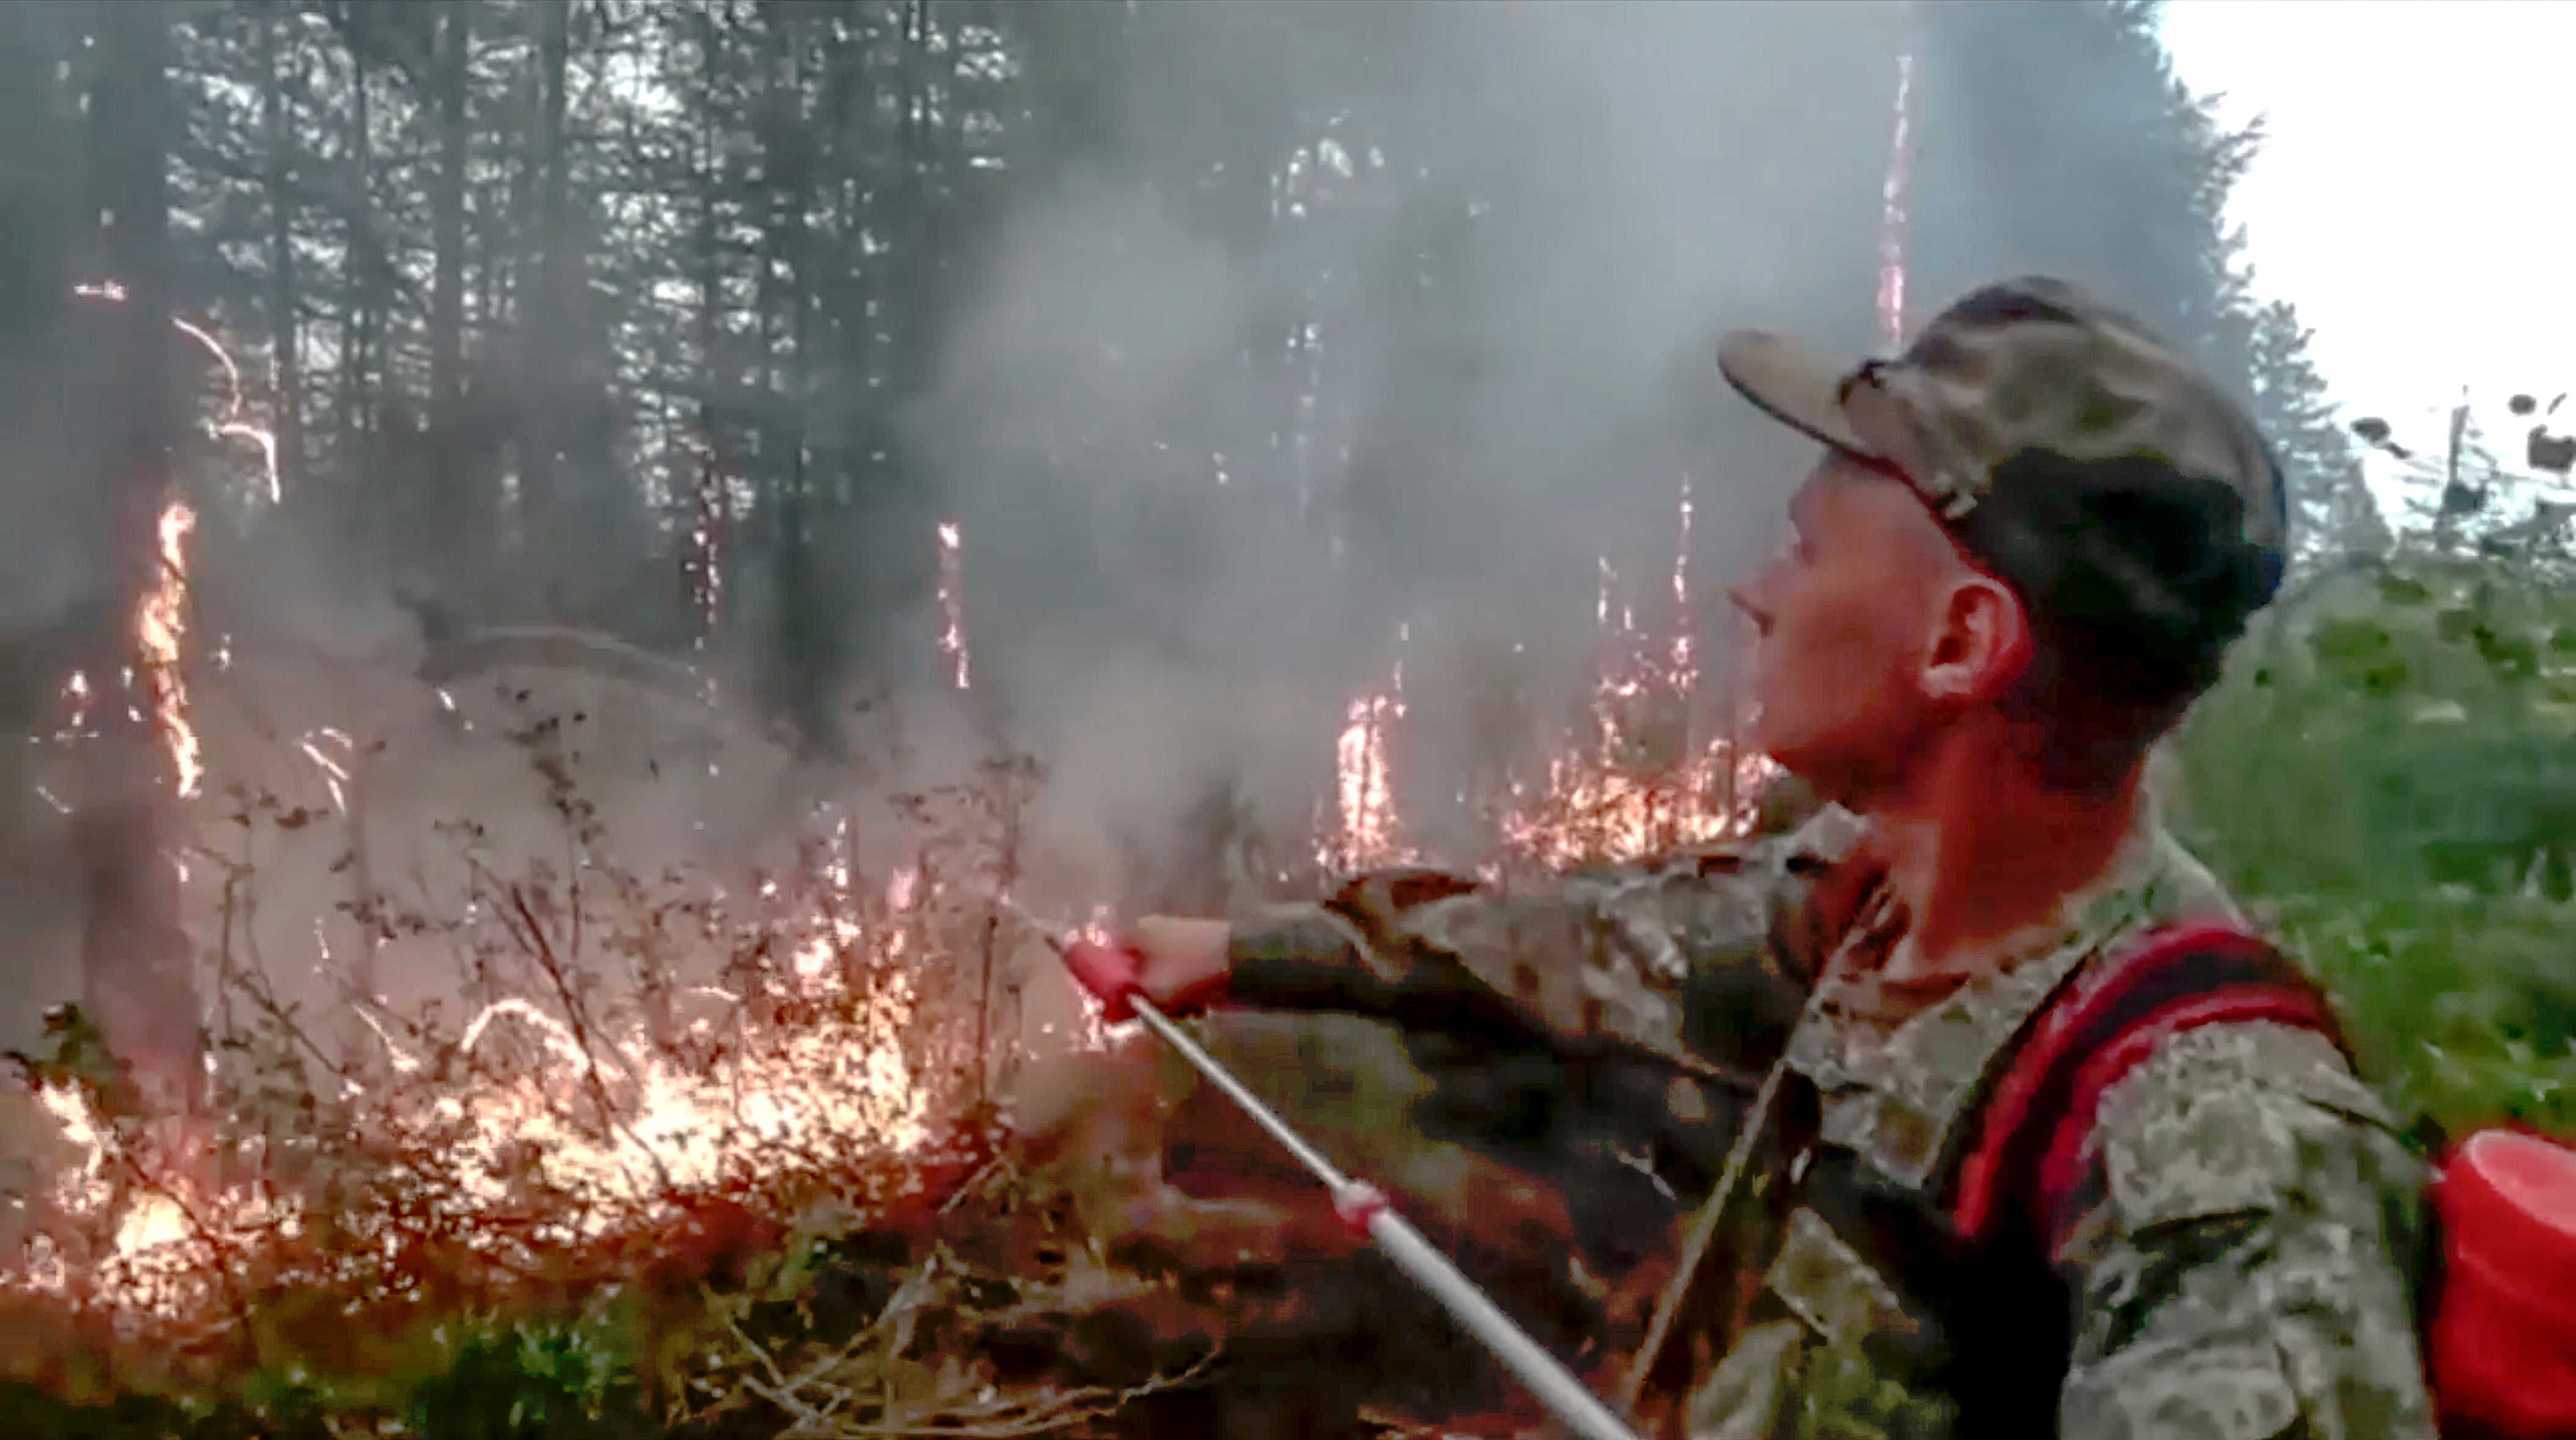 A Russian military engineer extinguishes forest fires in the Sakha Republic also known as Yakutia, far eastern Russia